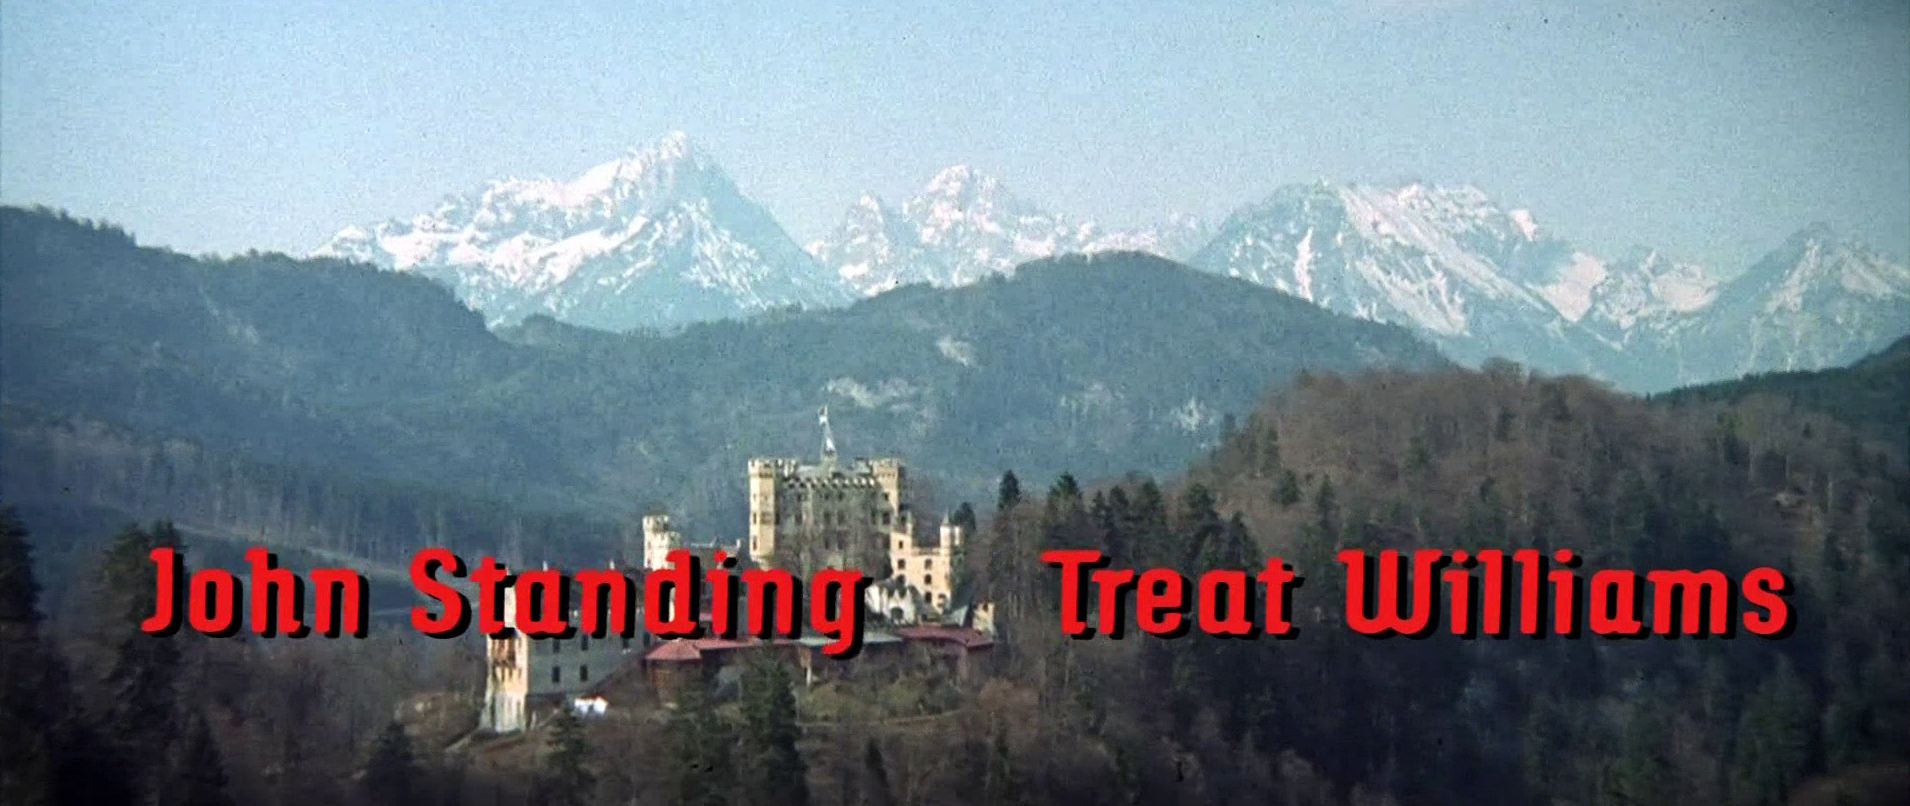 Main title from The Eagle Has Landed (1976) (11). John Standing, Treat Williams